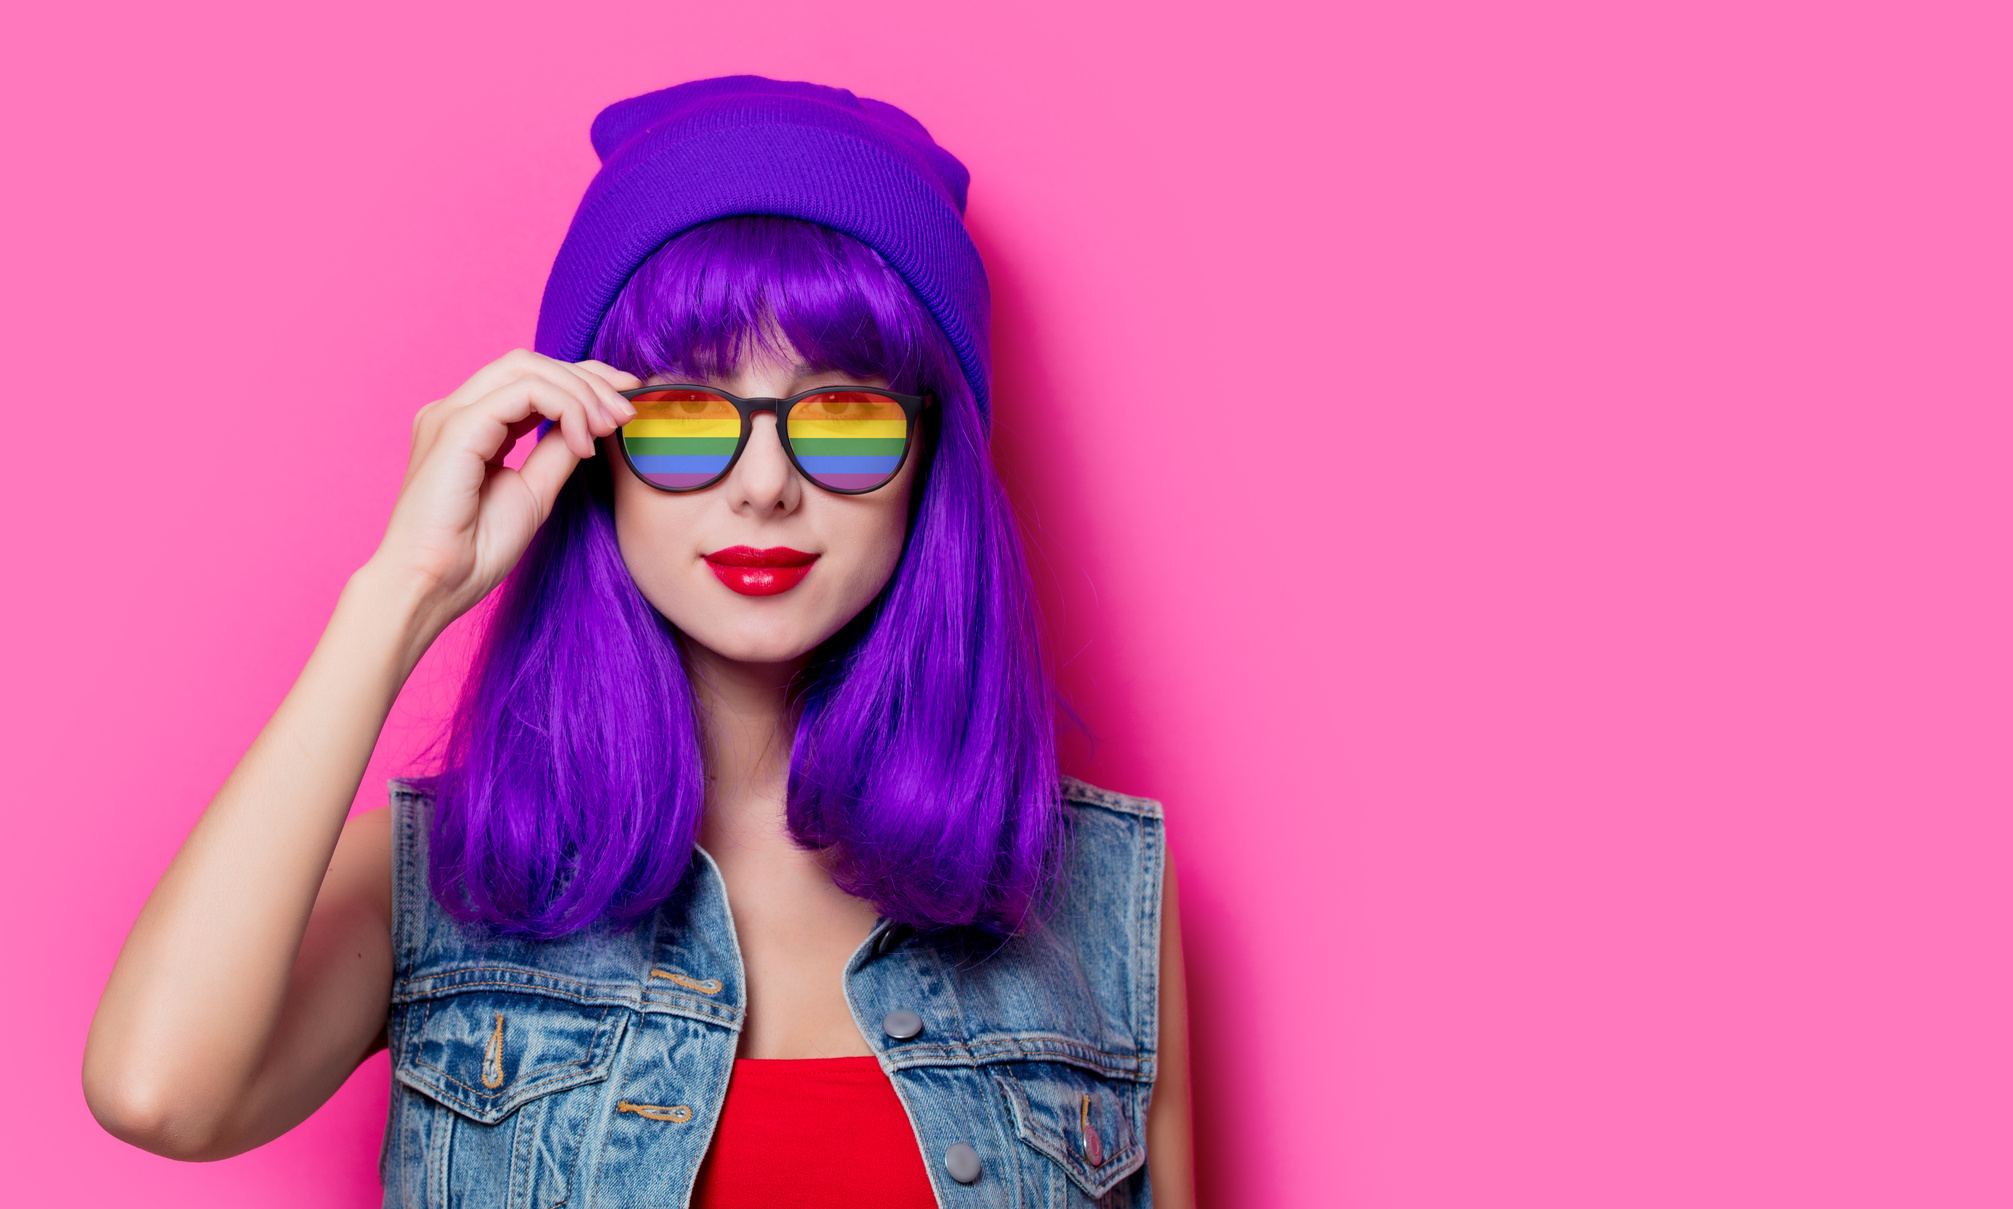 Girl with purple hair and with rainbow eyeglasses